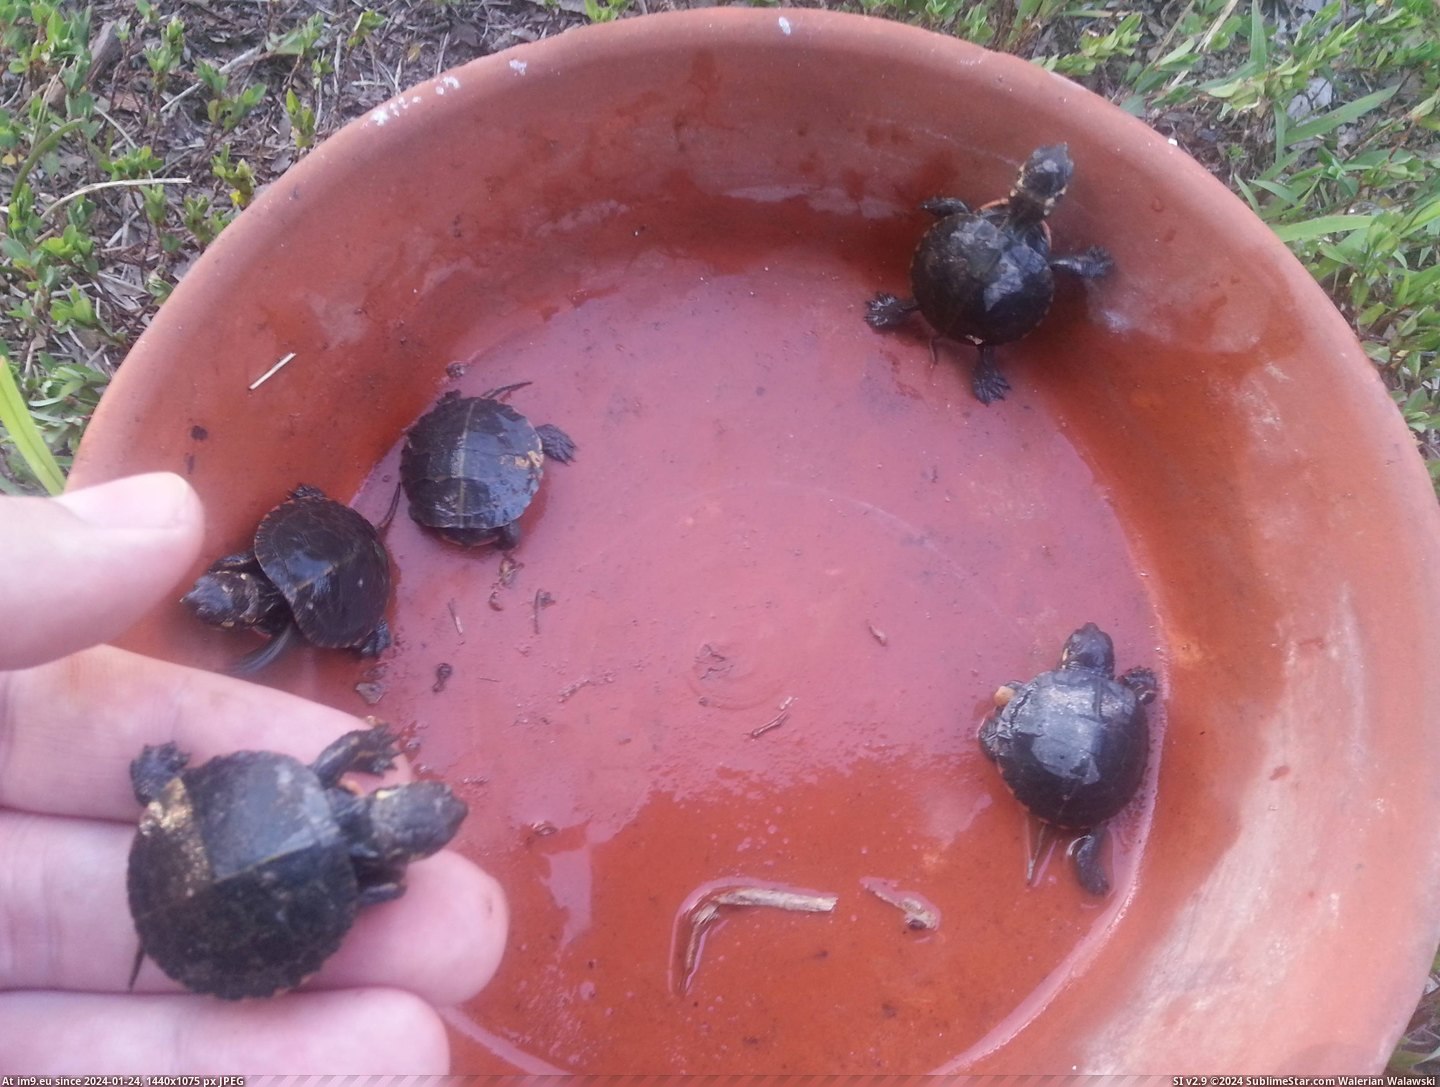 #Baby #Turtles #Hatched #Yard [Aww] These baby turtles just hatched in my yard! Pic. (Изображение из альбом My r/AWW favs))